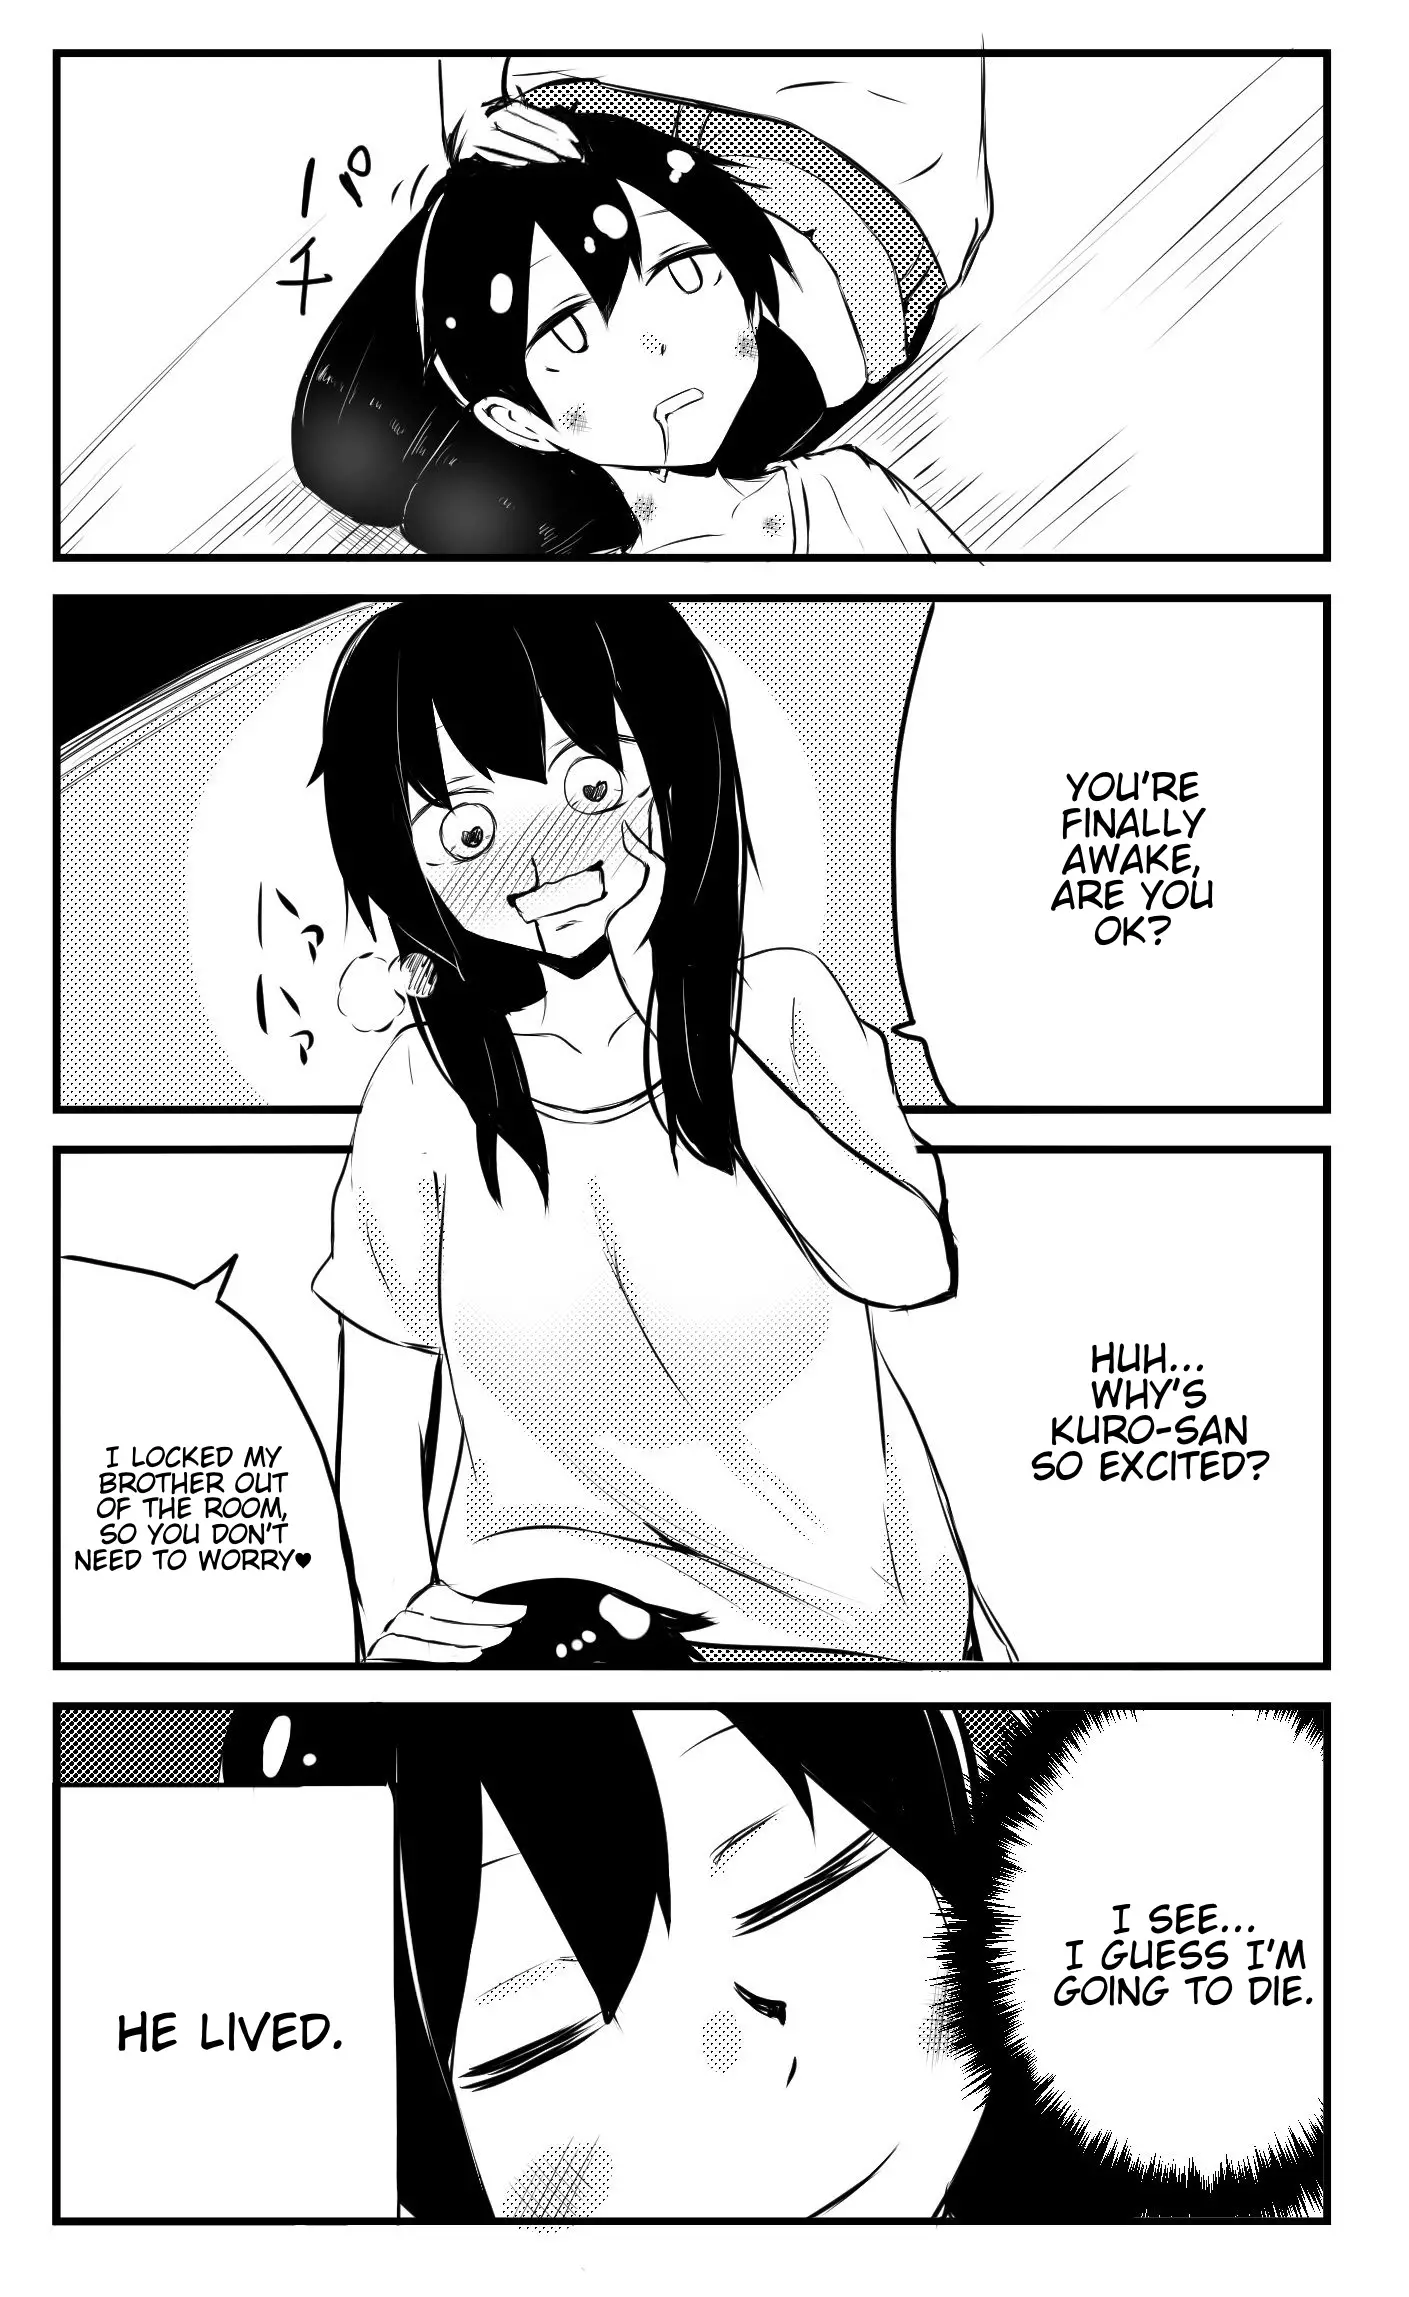 A Story About Wanting To Commit Suicide, But It's Scary So I Find A Yandere Girl To Kill Me, But It Doesn't Work - 26 page 1-ef3aa315